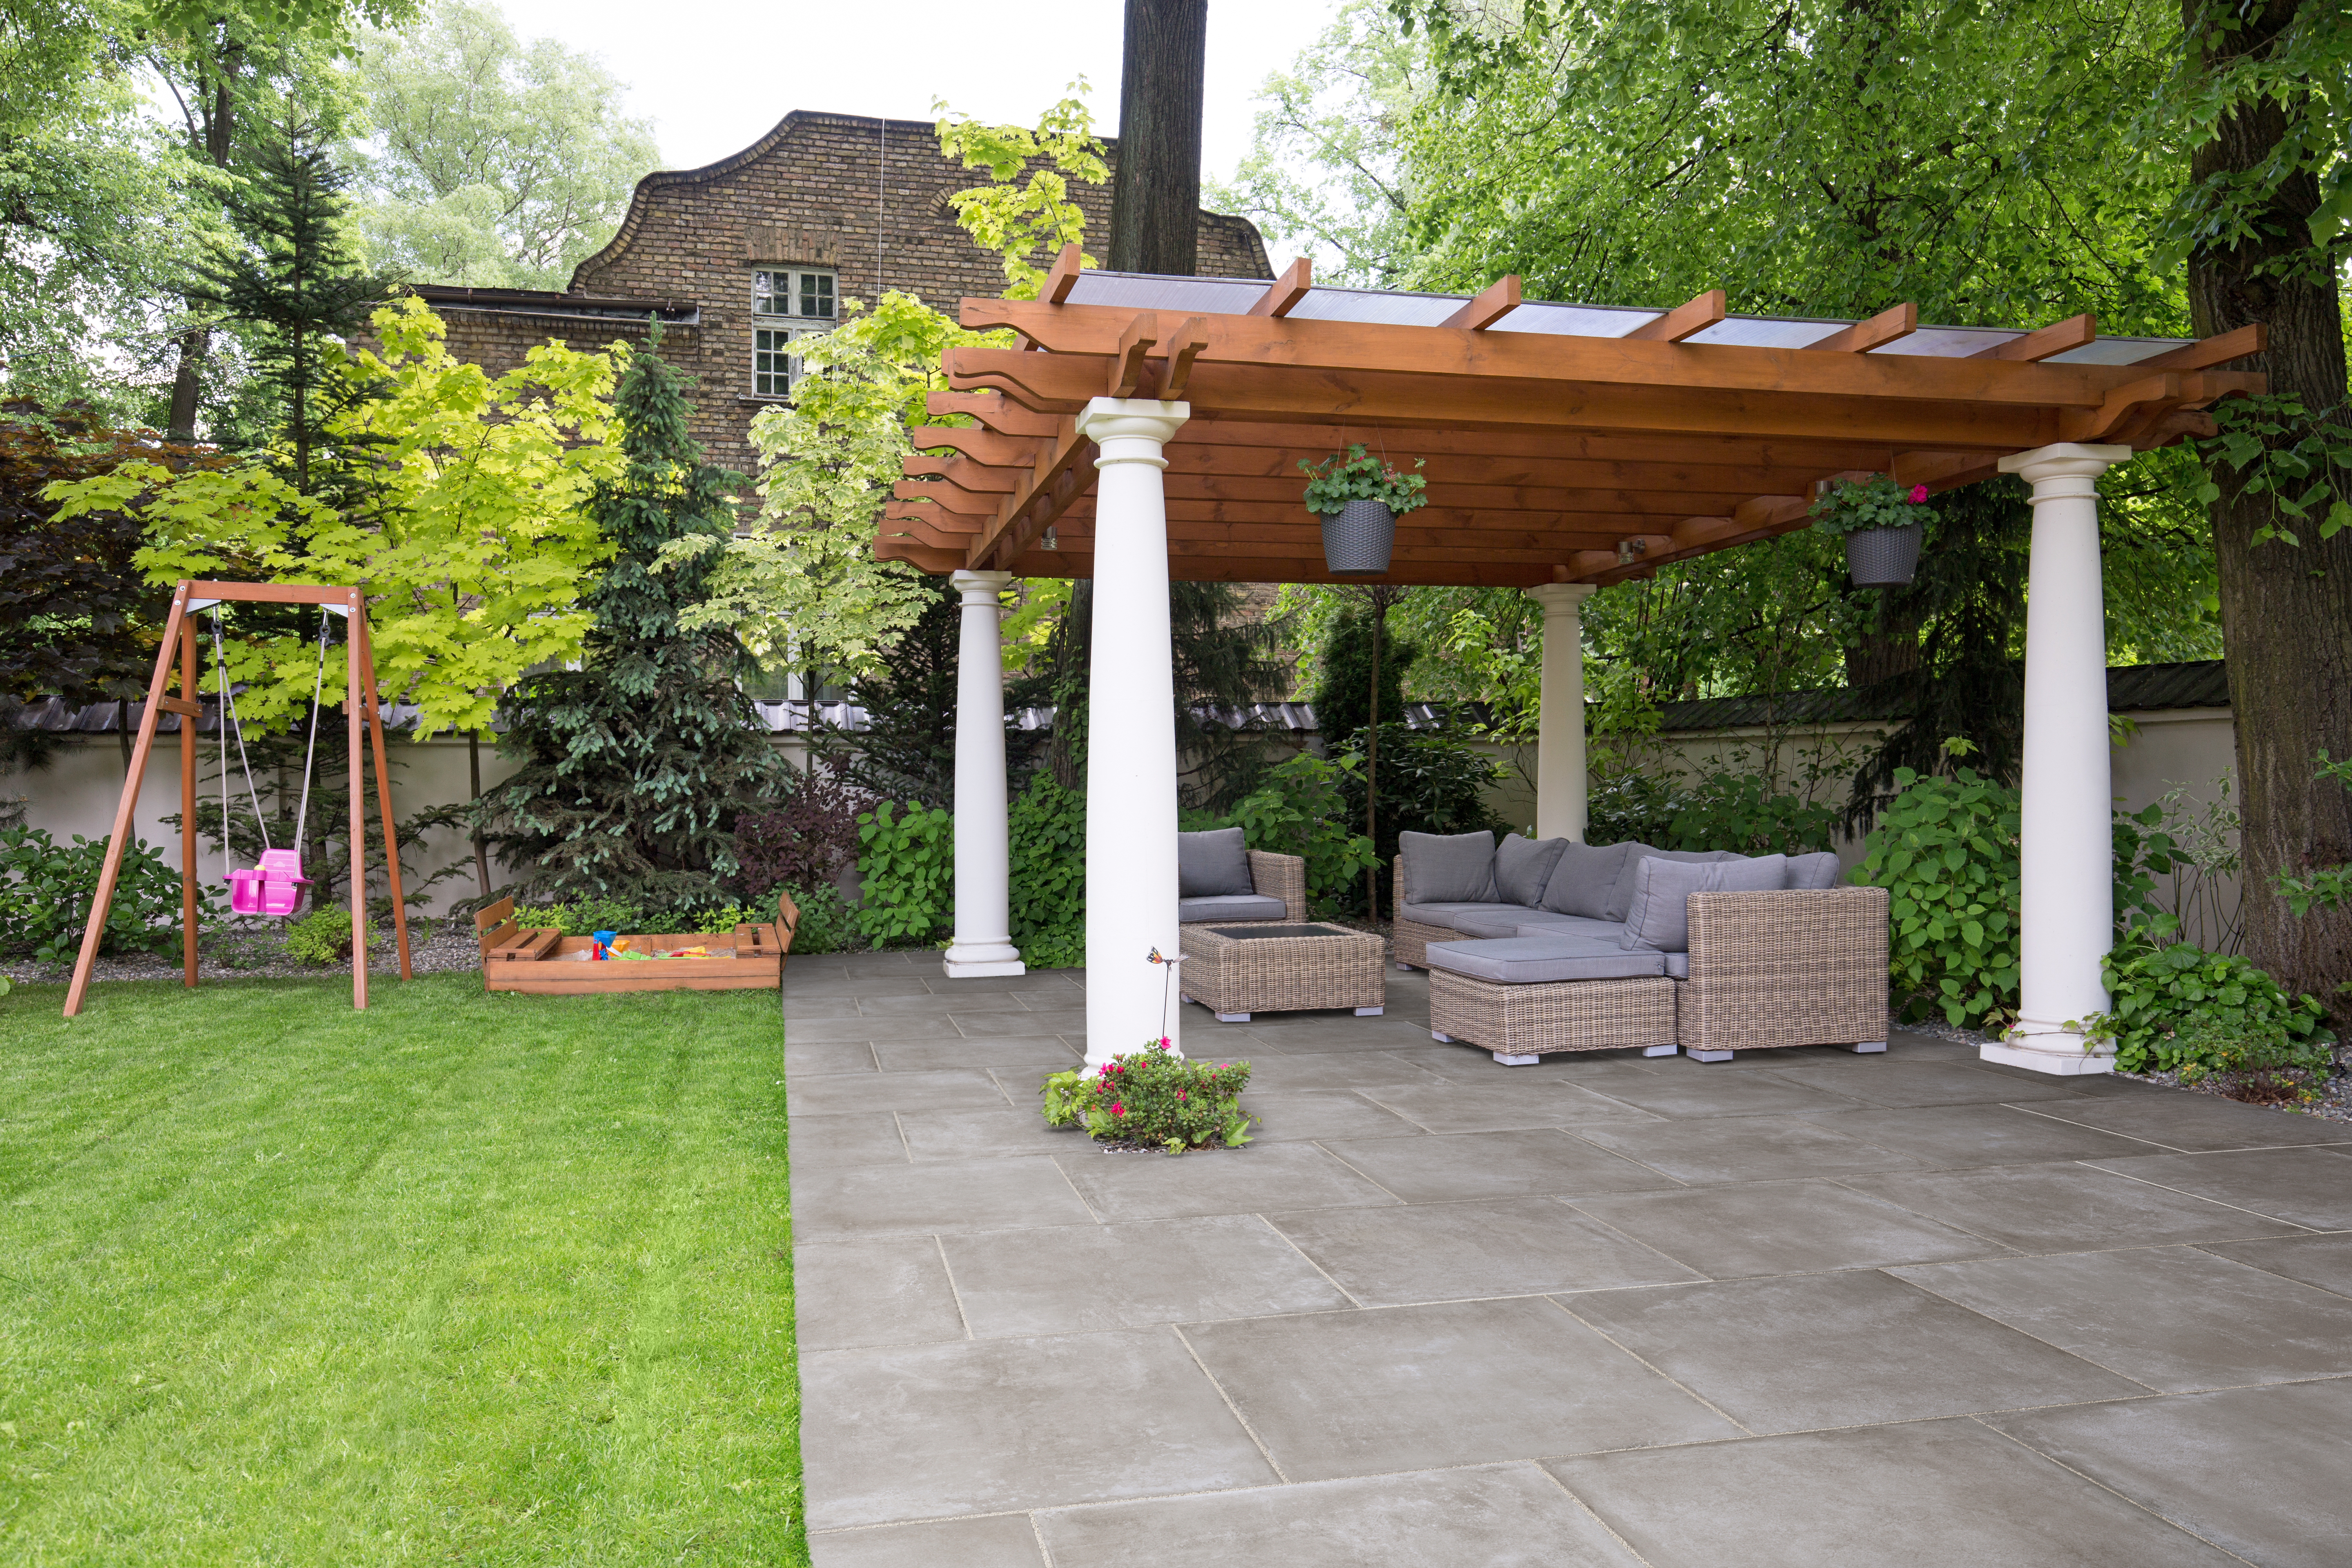 A large awning over garden furniture